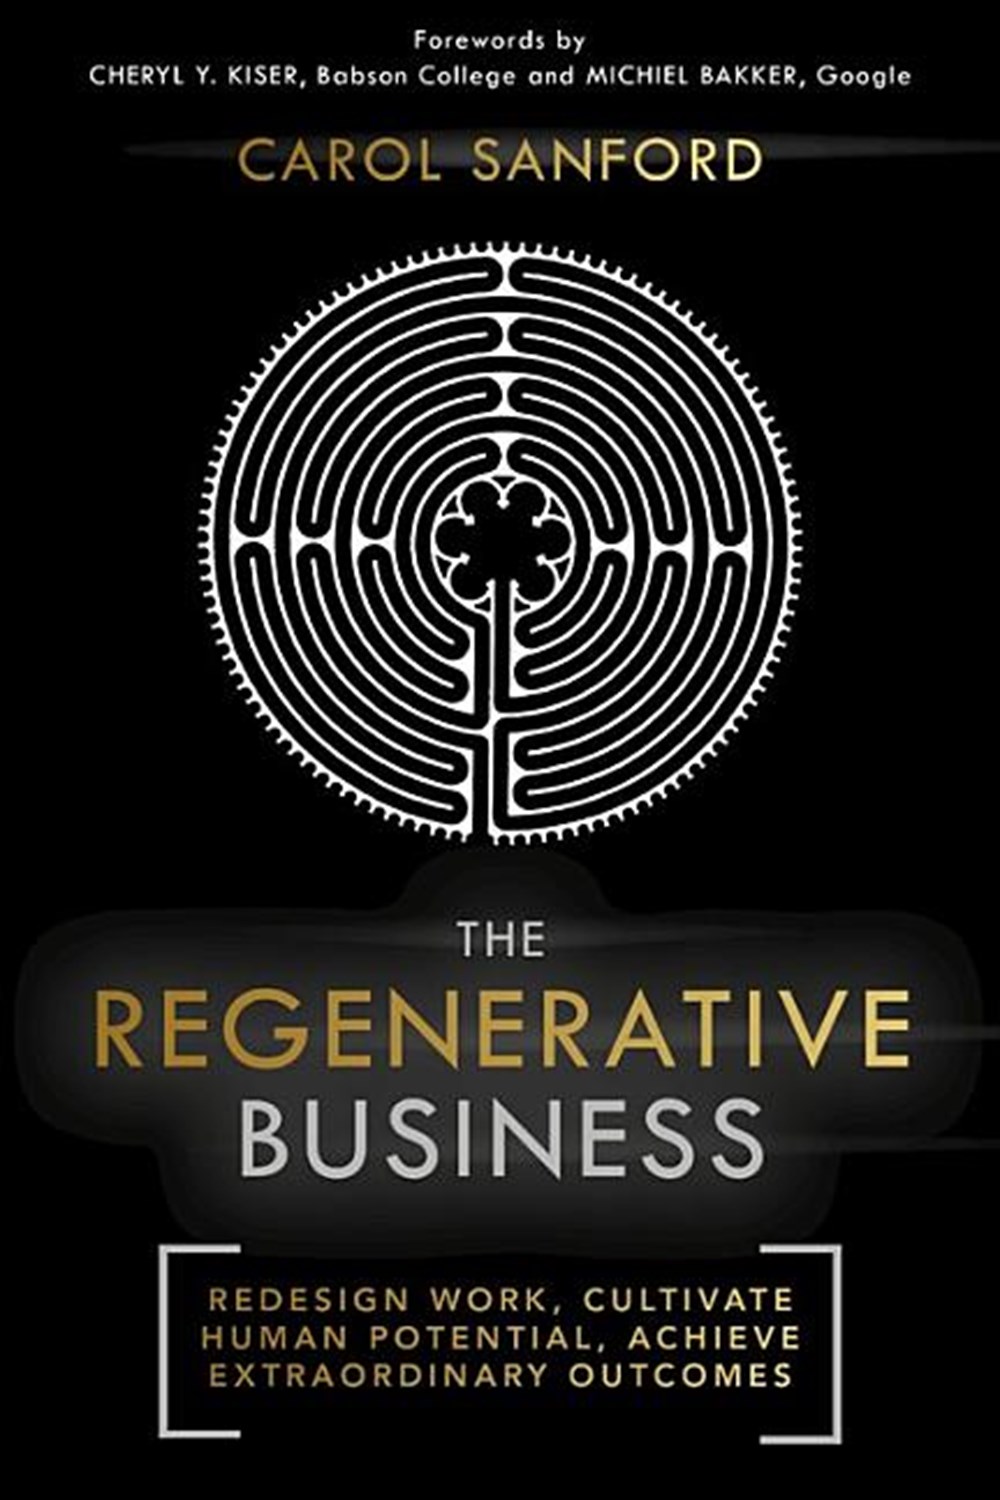 Regenerative Business: Redesign Work, Cultivate Human Potential, Achieve Extraordinary Outcomes